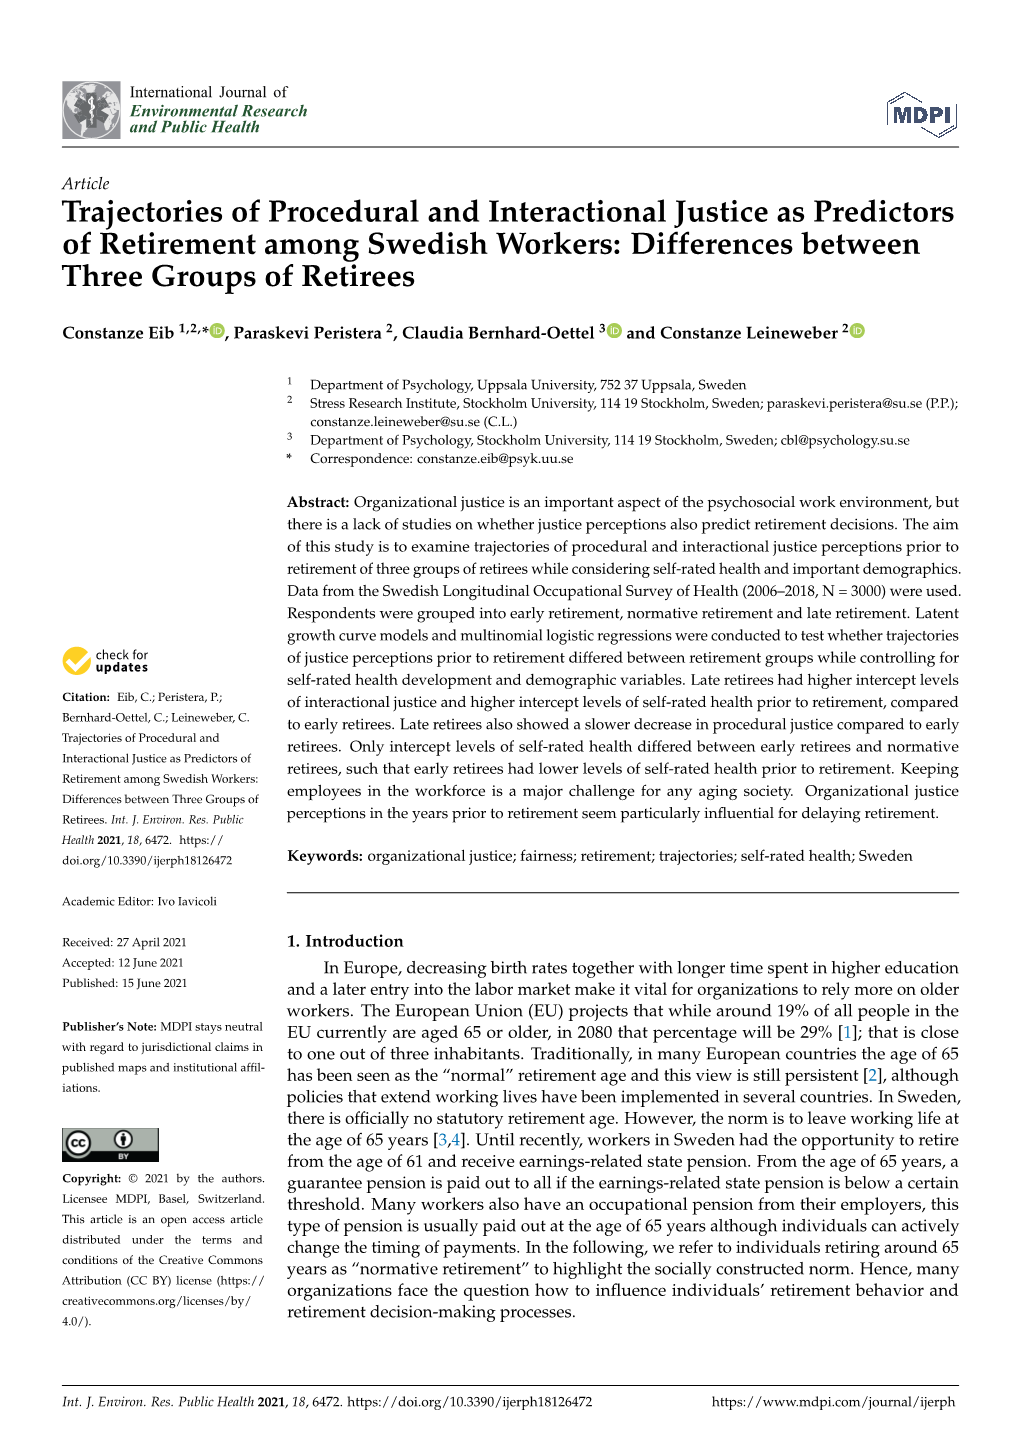 Trajectories of Procedural and Interactional Justice As Predictors of Retirement Among Swedish Workers: Differences Between Three Groups of Retirees